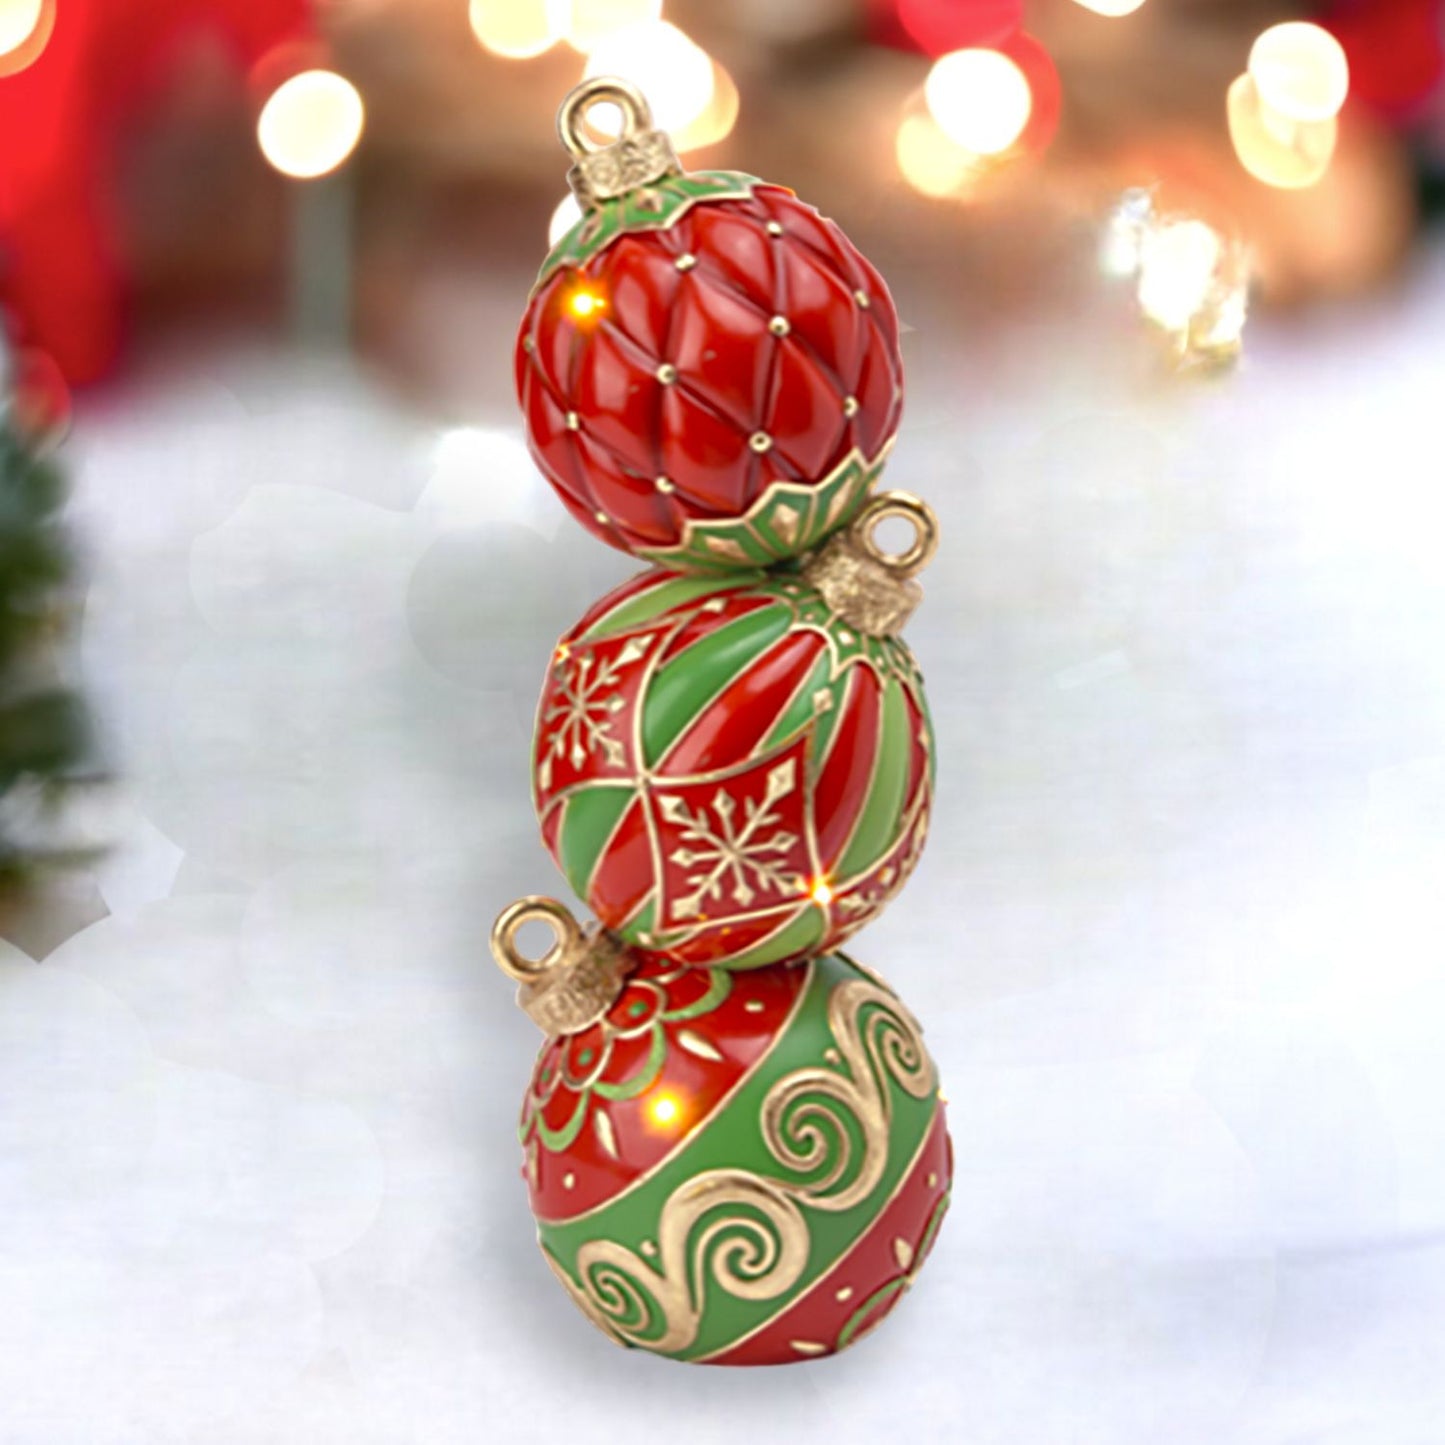 December Diamonds Christmas Carousel 16-Inch Stacked Led Ornaments, Multicolor